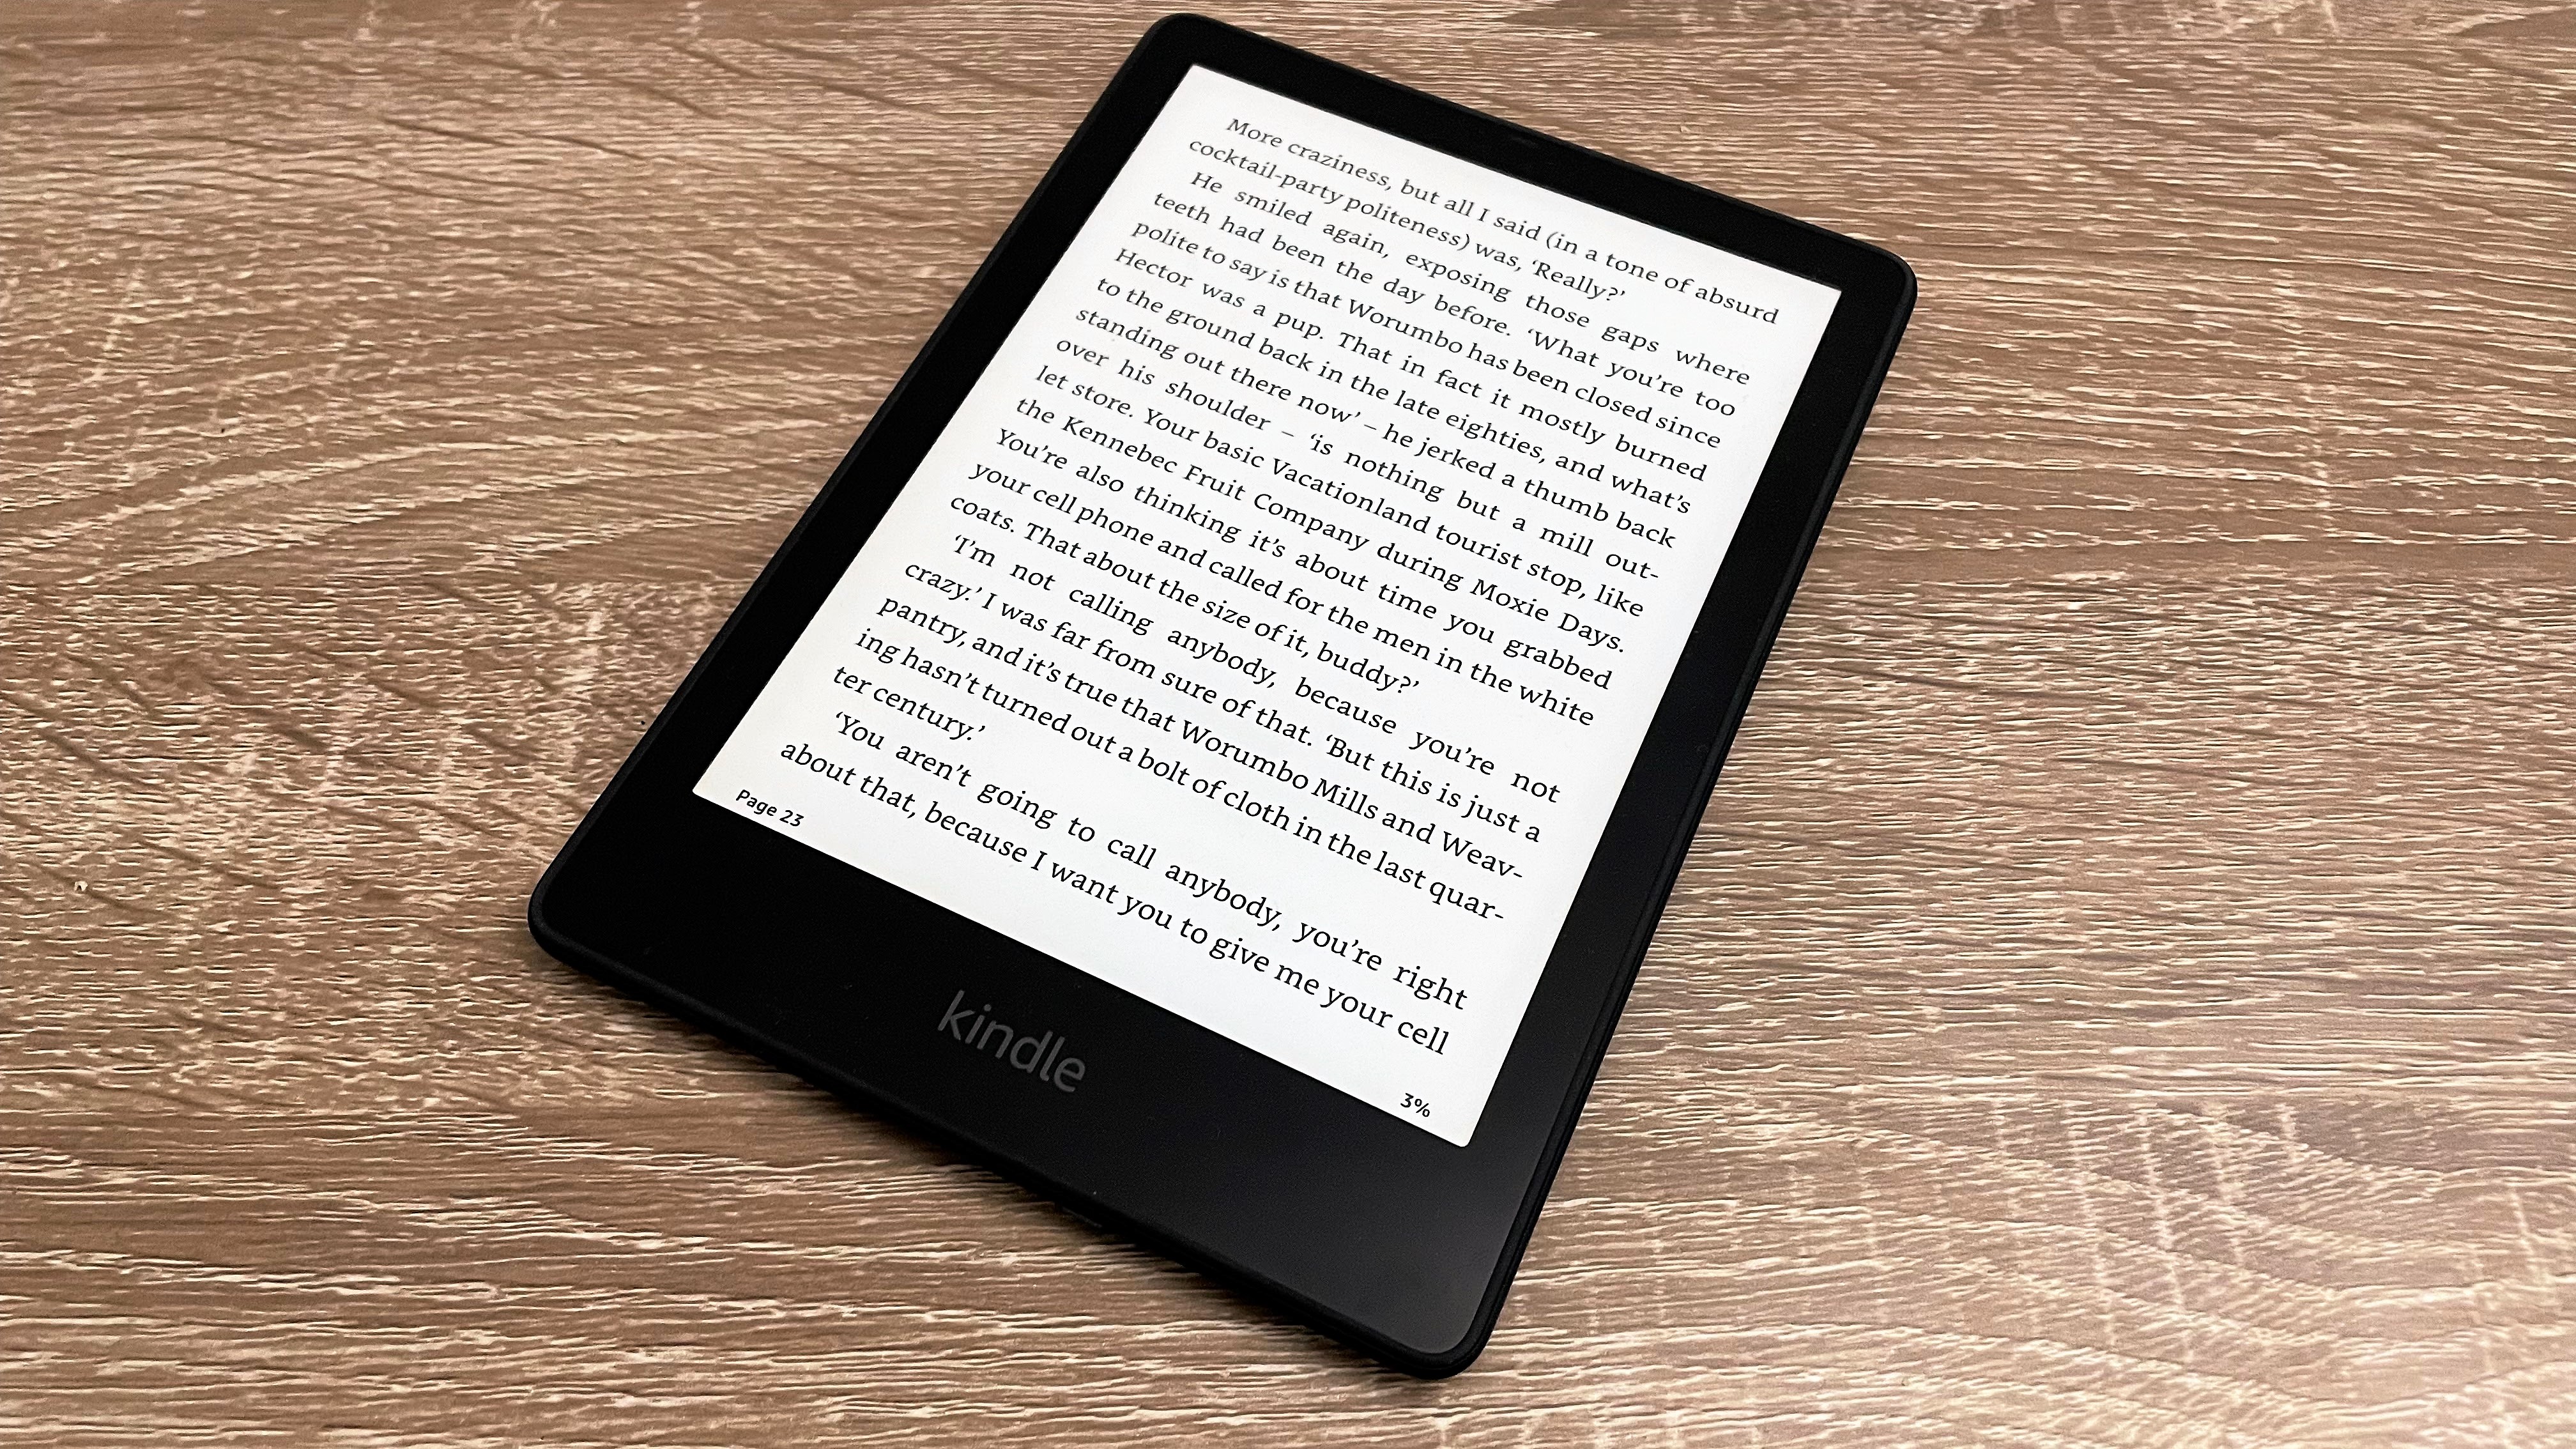 Review: The Kindle Paperwhite Signature Edition plays it safe